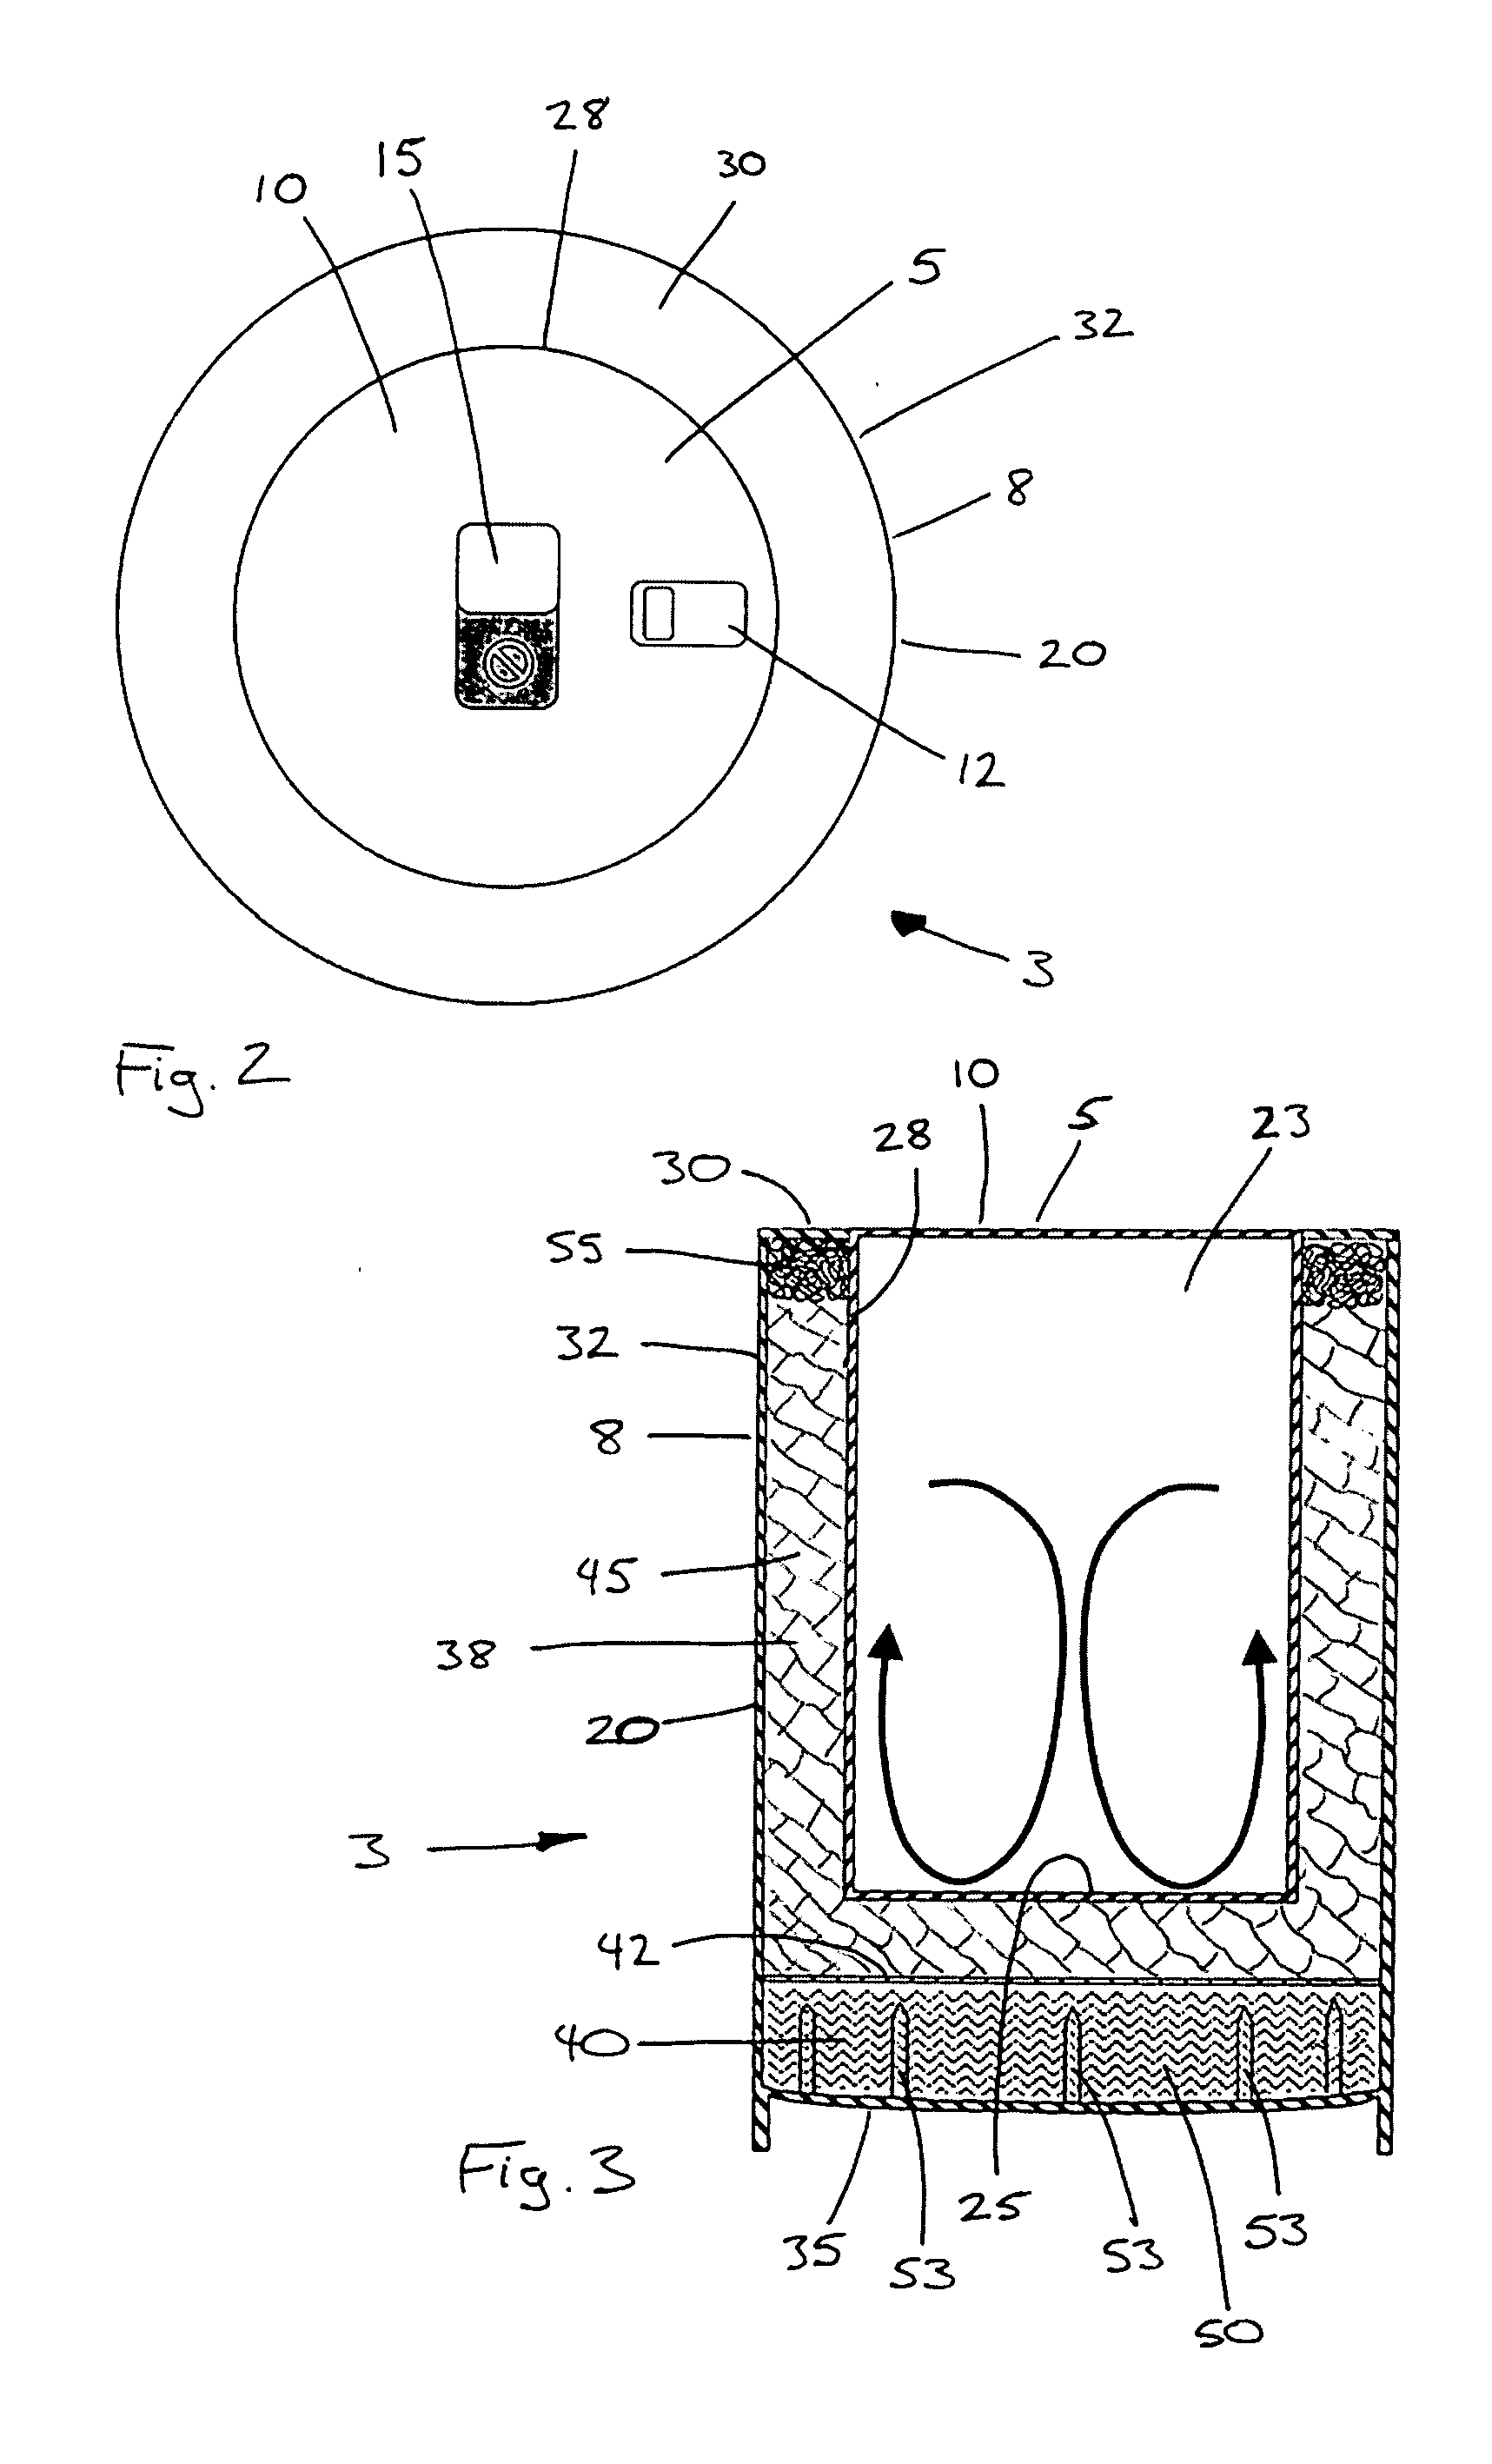 Self-contained temperature-change container assemblies